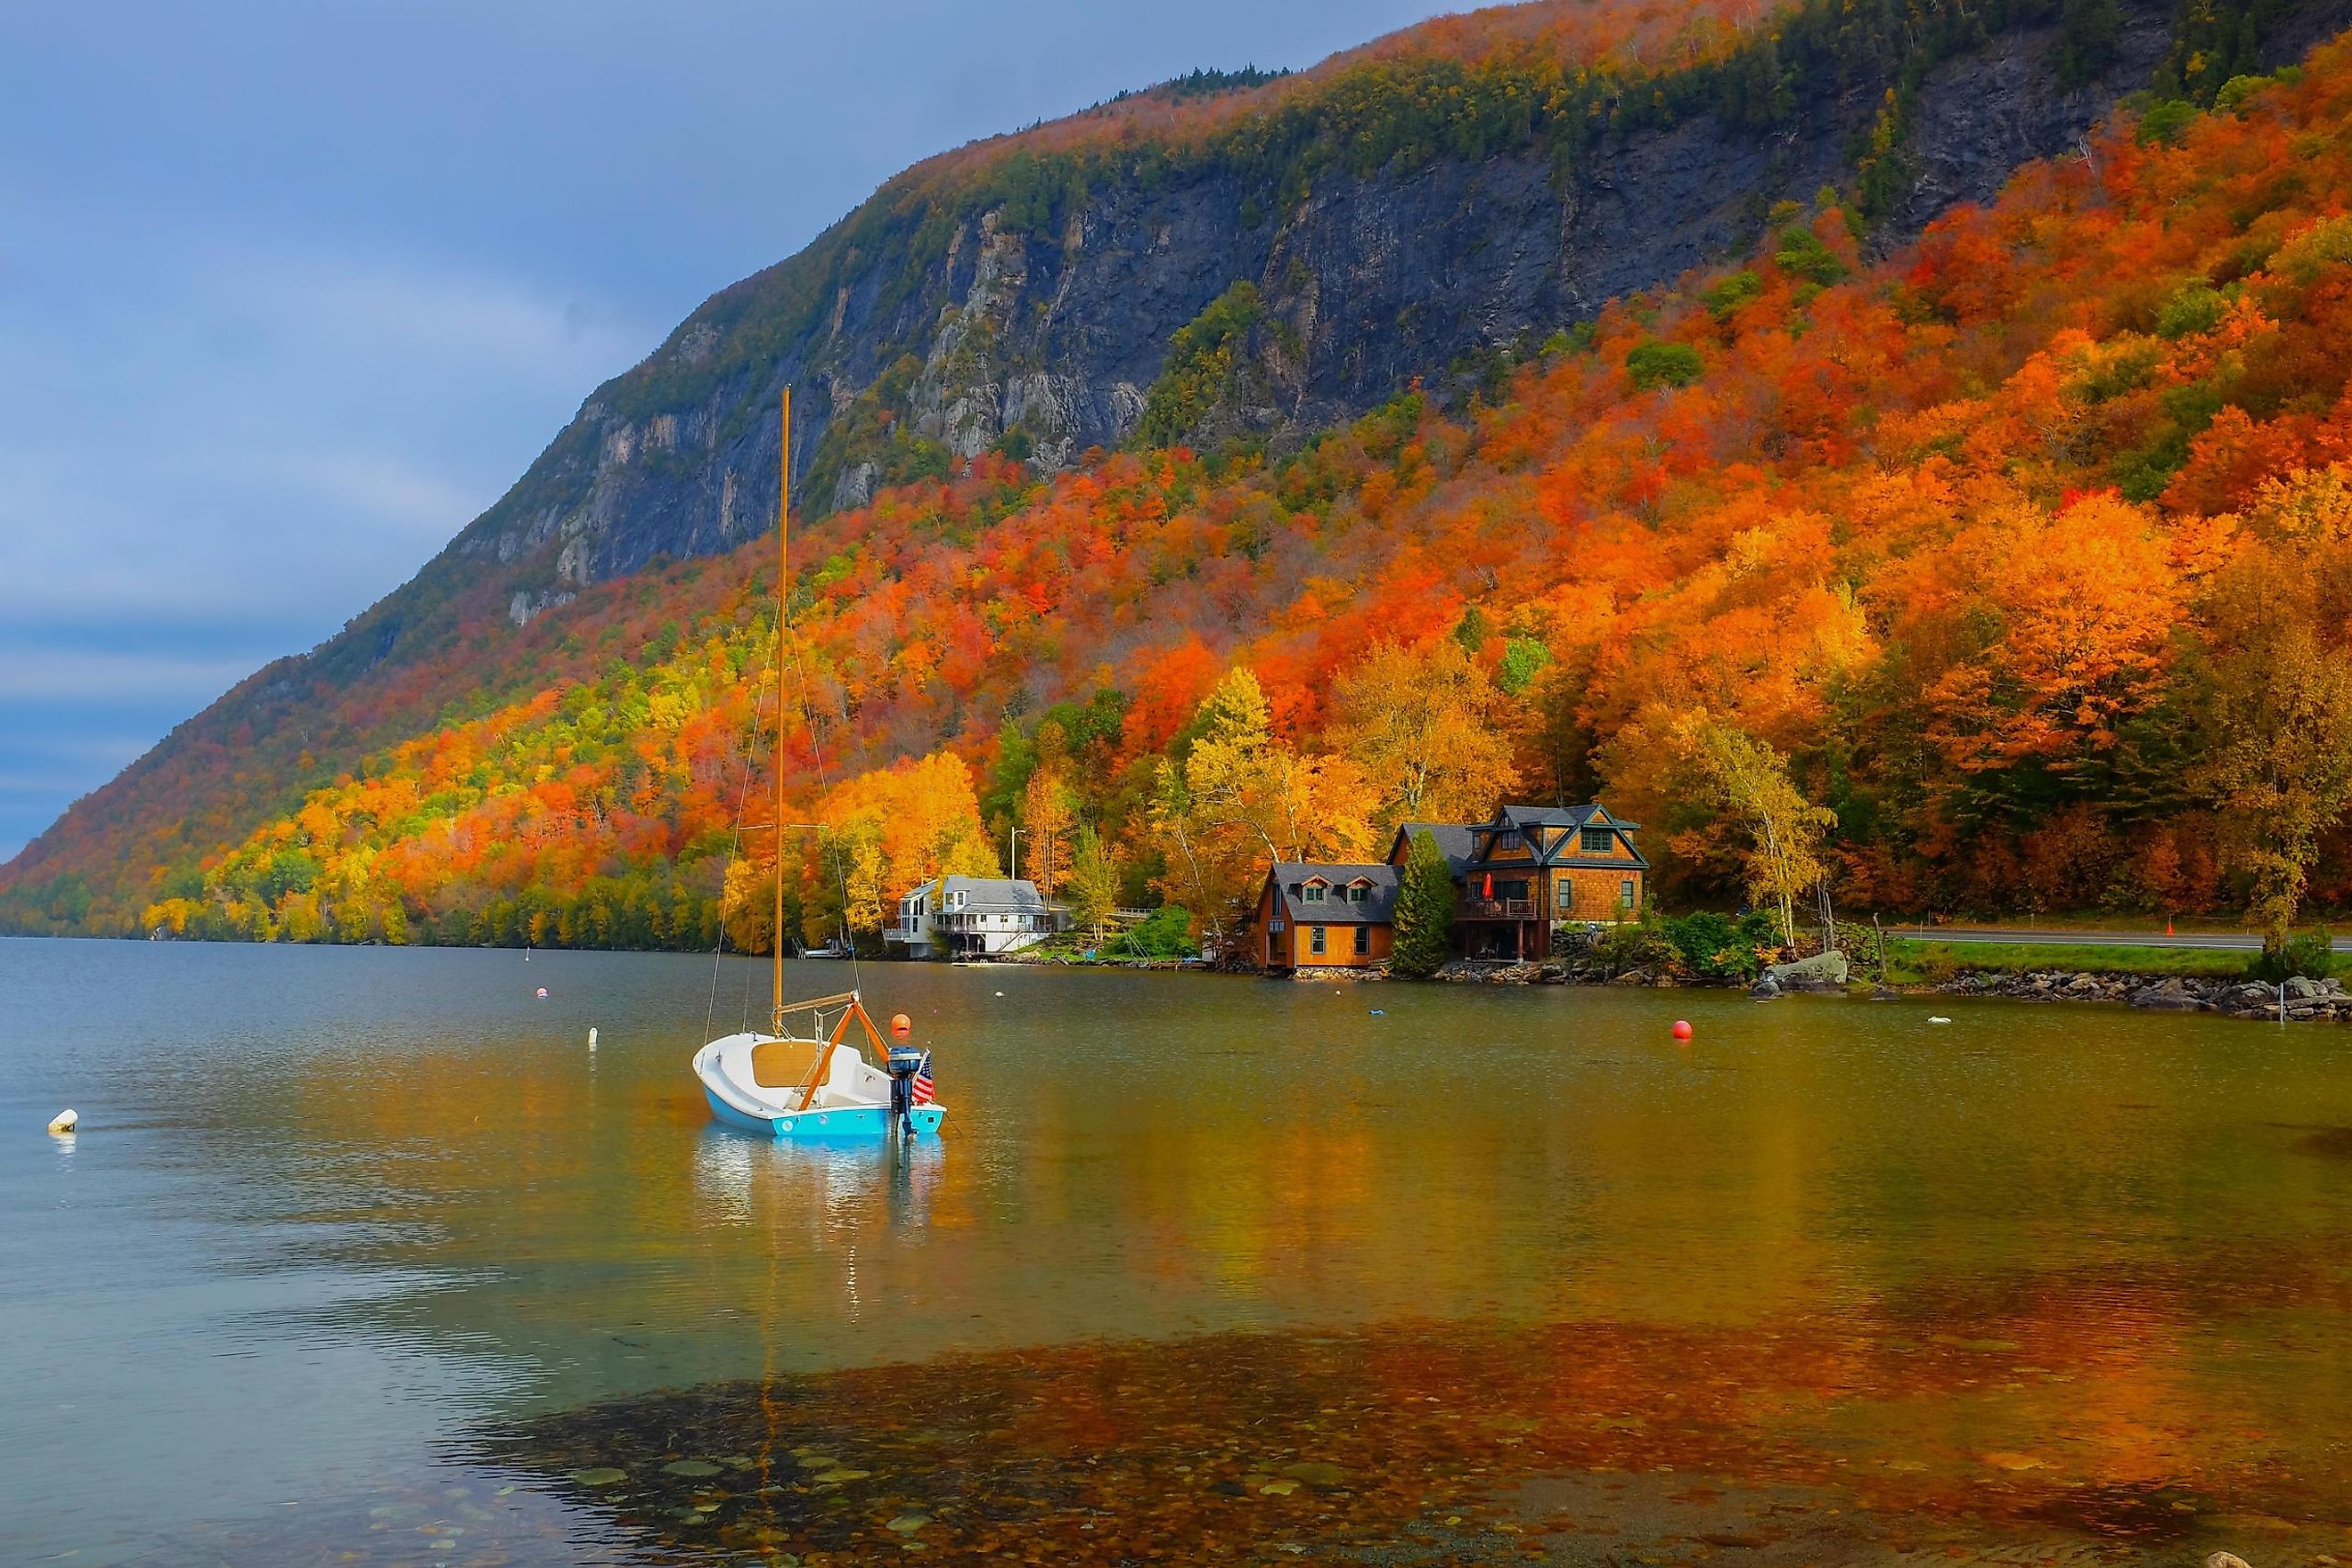 Lake Willoughby, Vermont, in autumn.